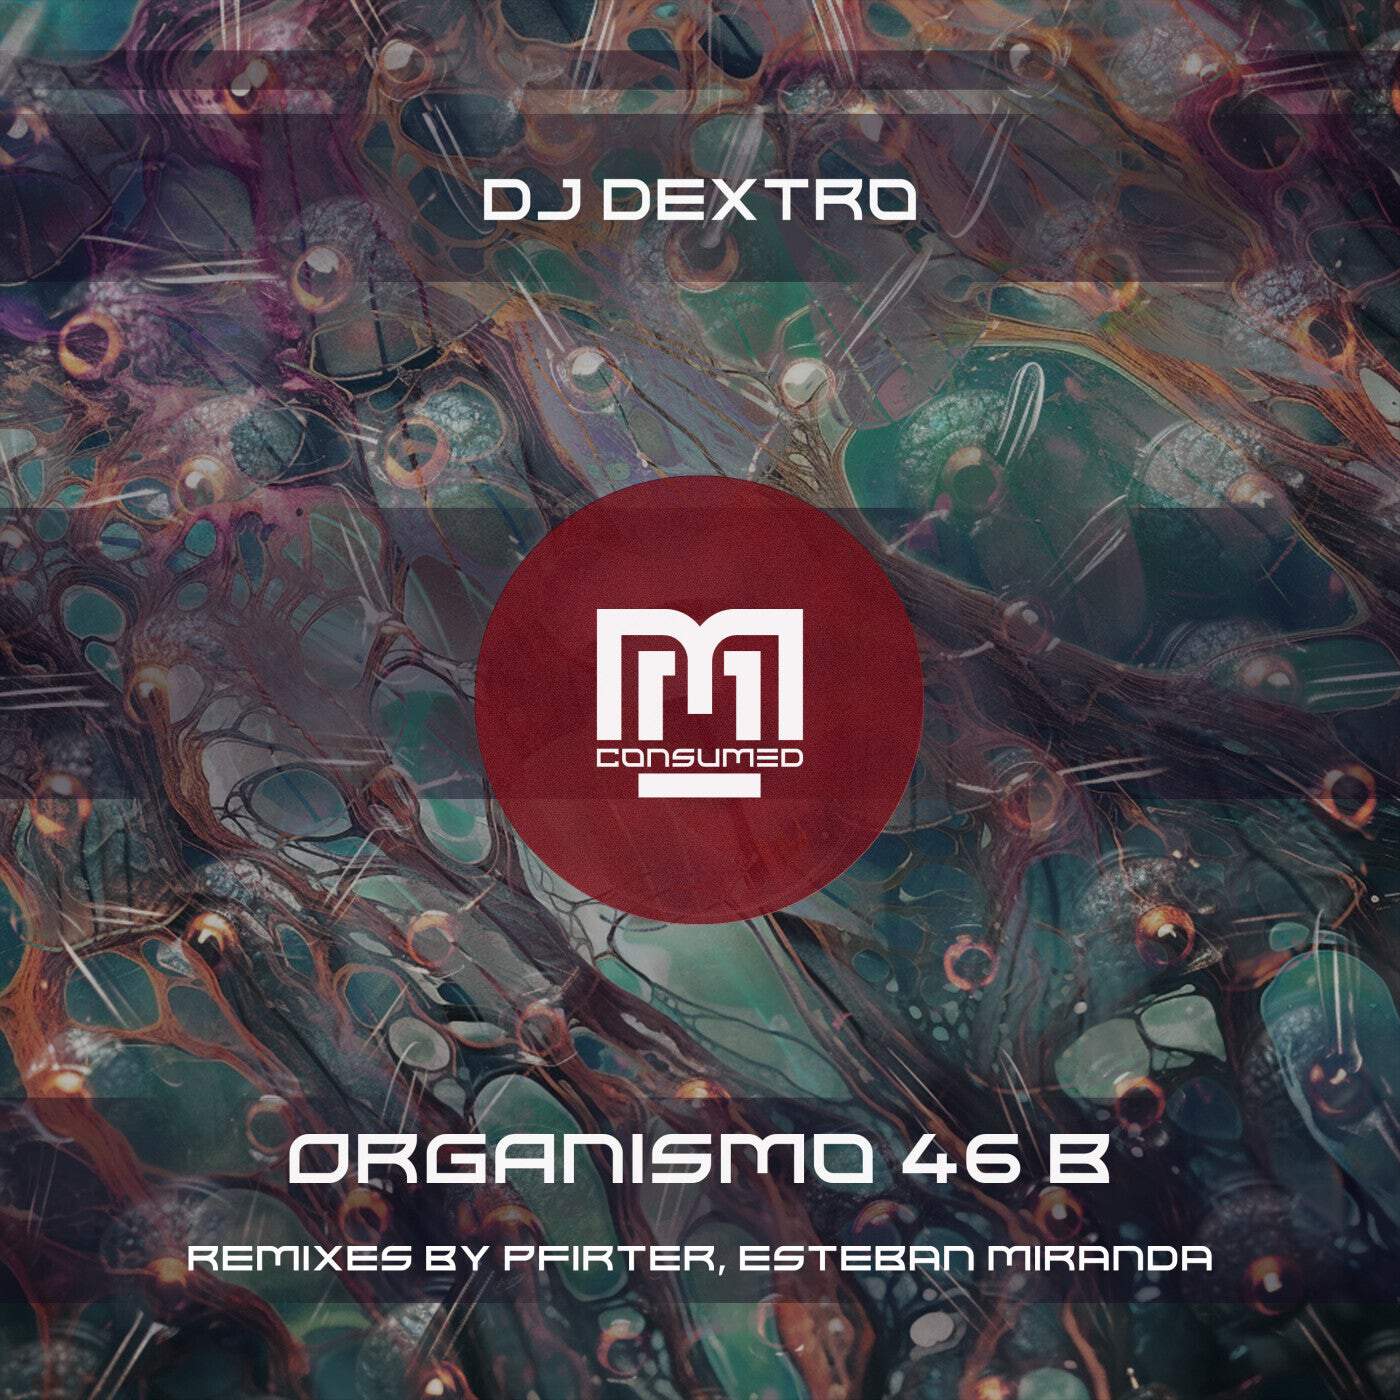 Release Cover: Organismo 46 B Download Free on Electrobuzz